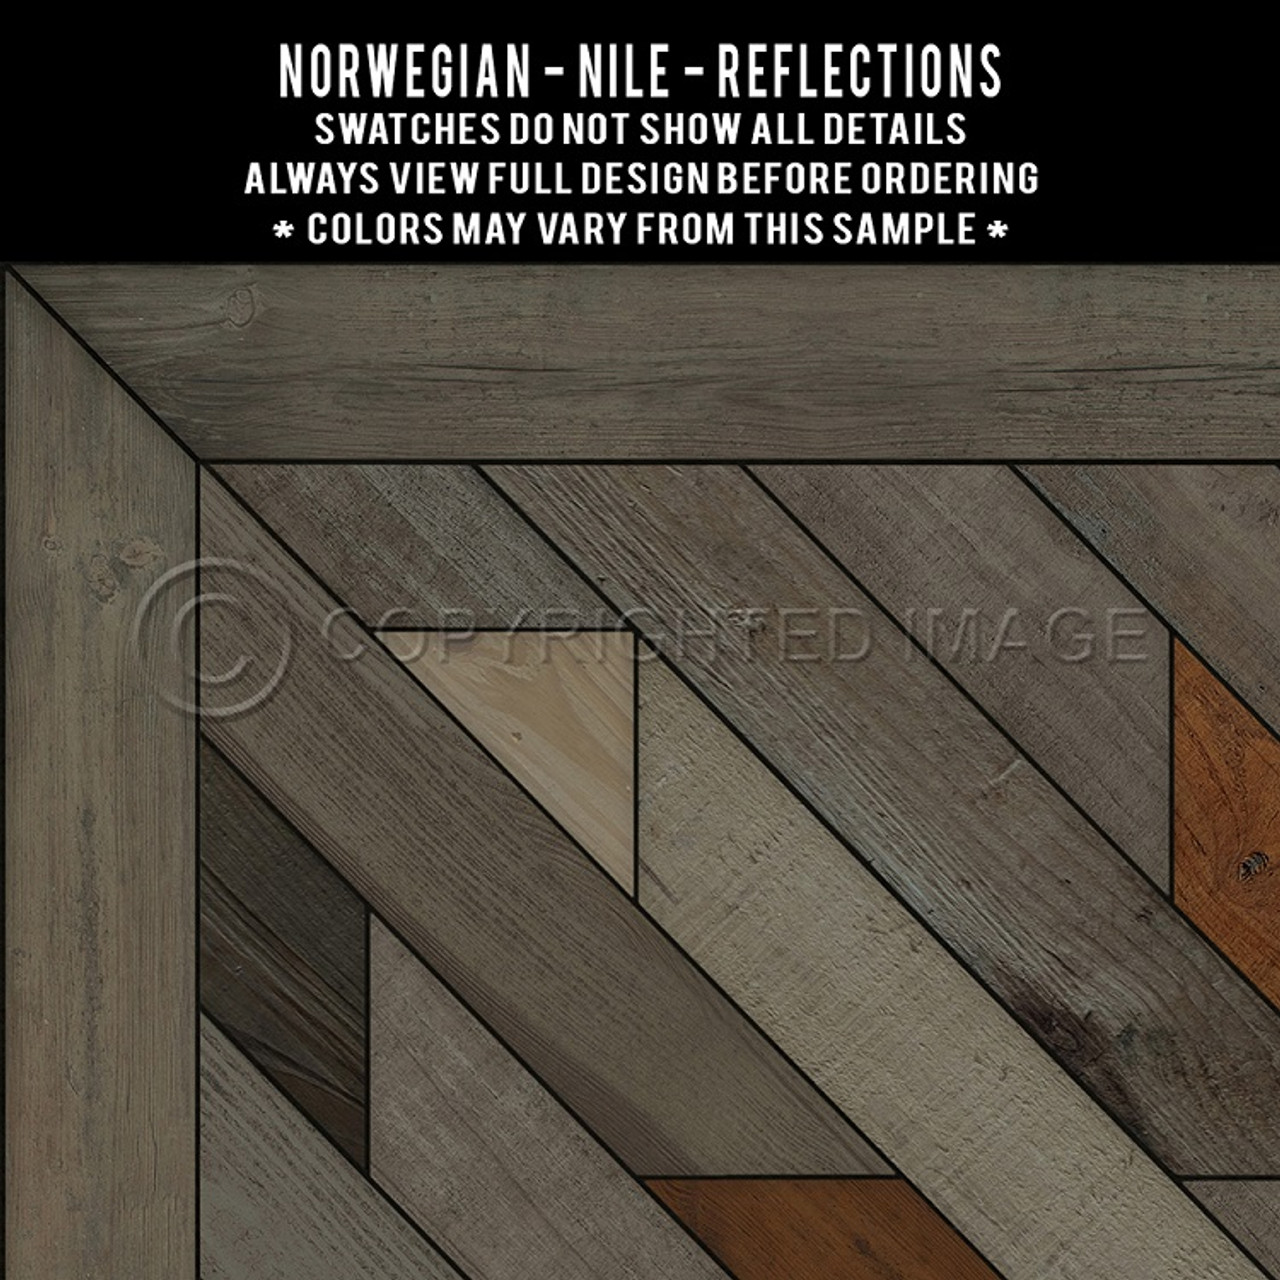 Swatches for Nile - vinyl floor cloth